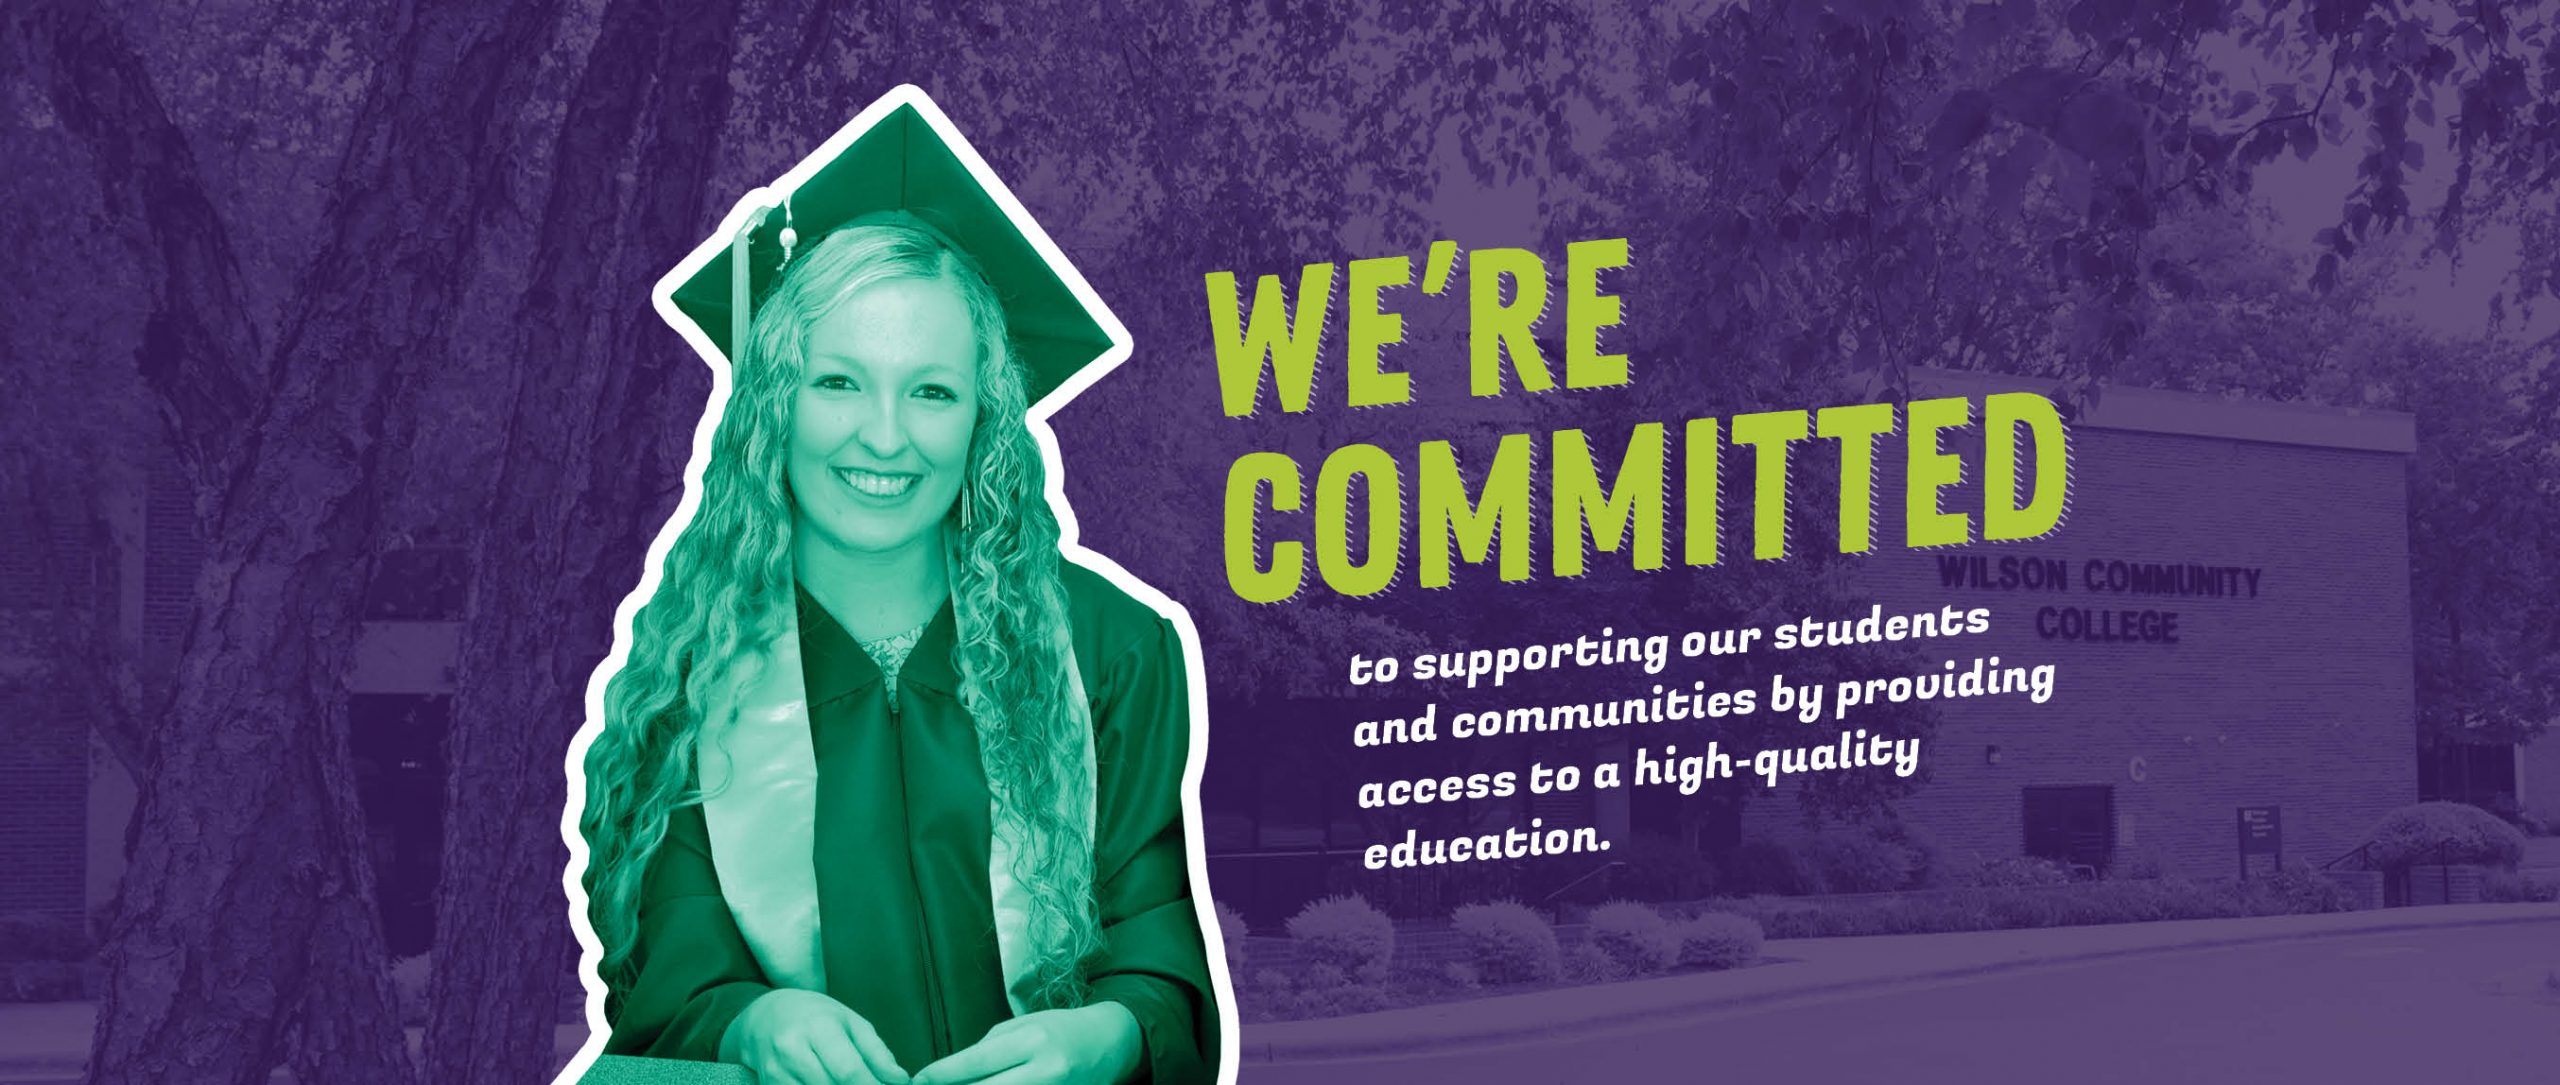 We're committed to supporting our students and communities by providing access to a high-quality education.